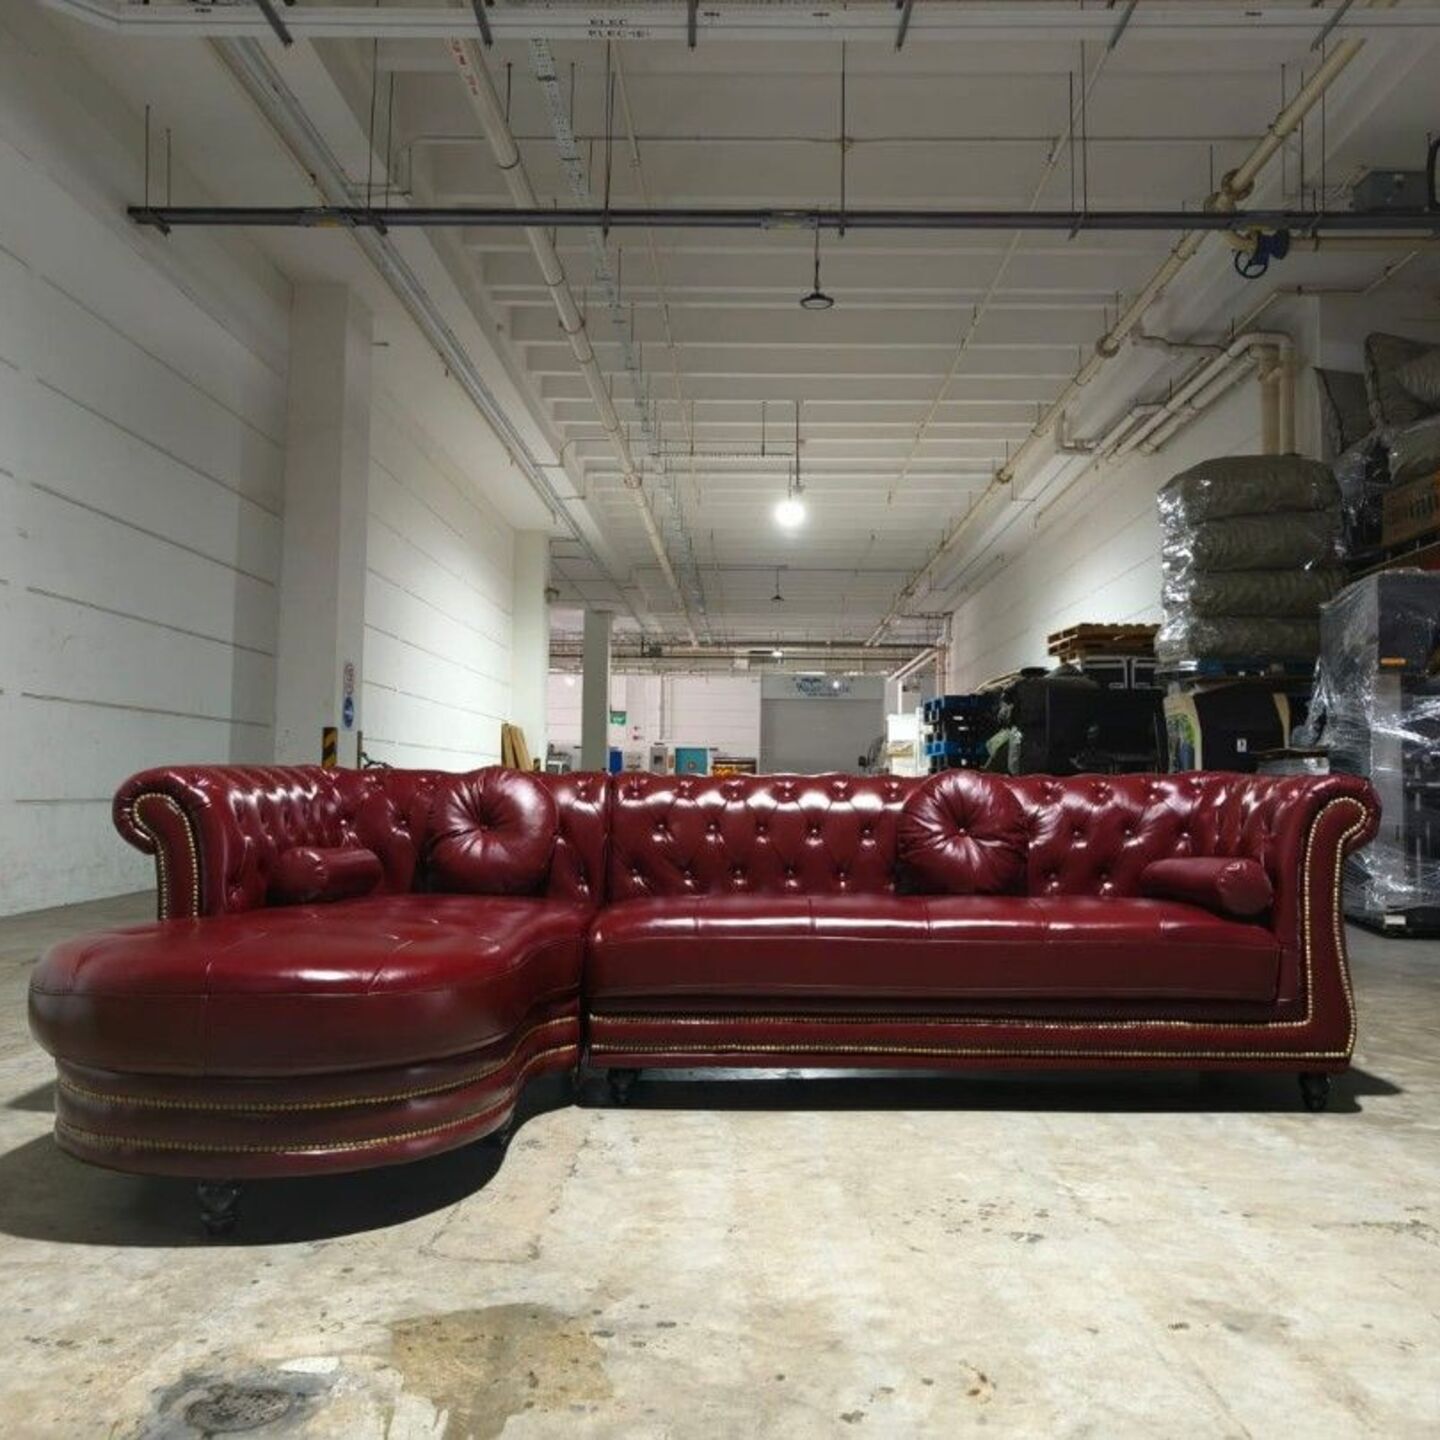 PRE-ORDERELYSIUM 4 Seater L-Shaped Chesterfield Sofa in BURGUNDY FULL Genuine Leather